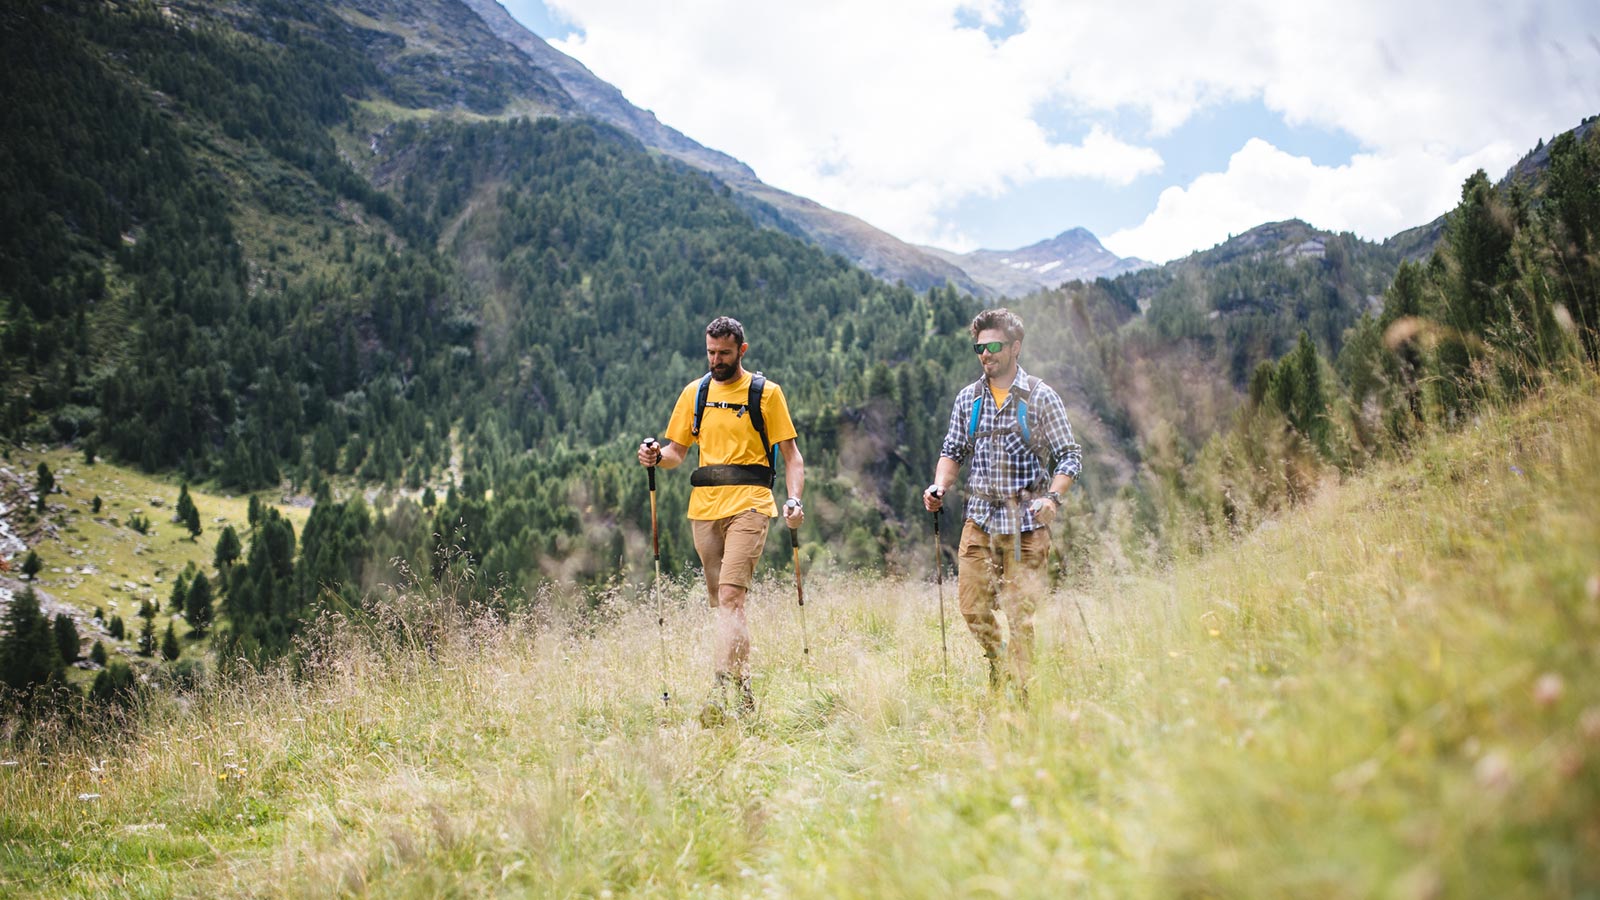 Two boys on a hike in nature at Santa Caterina Valfurva